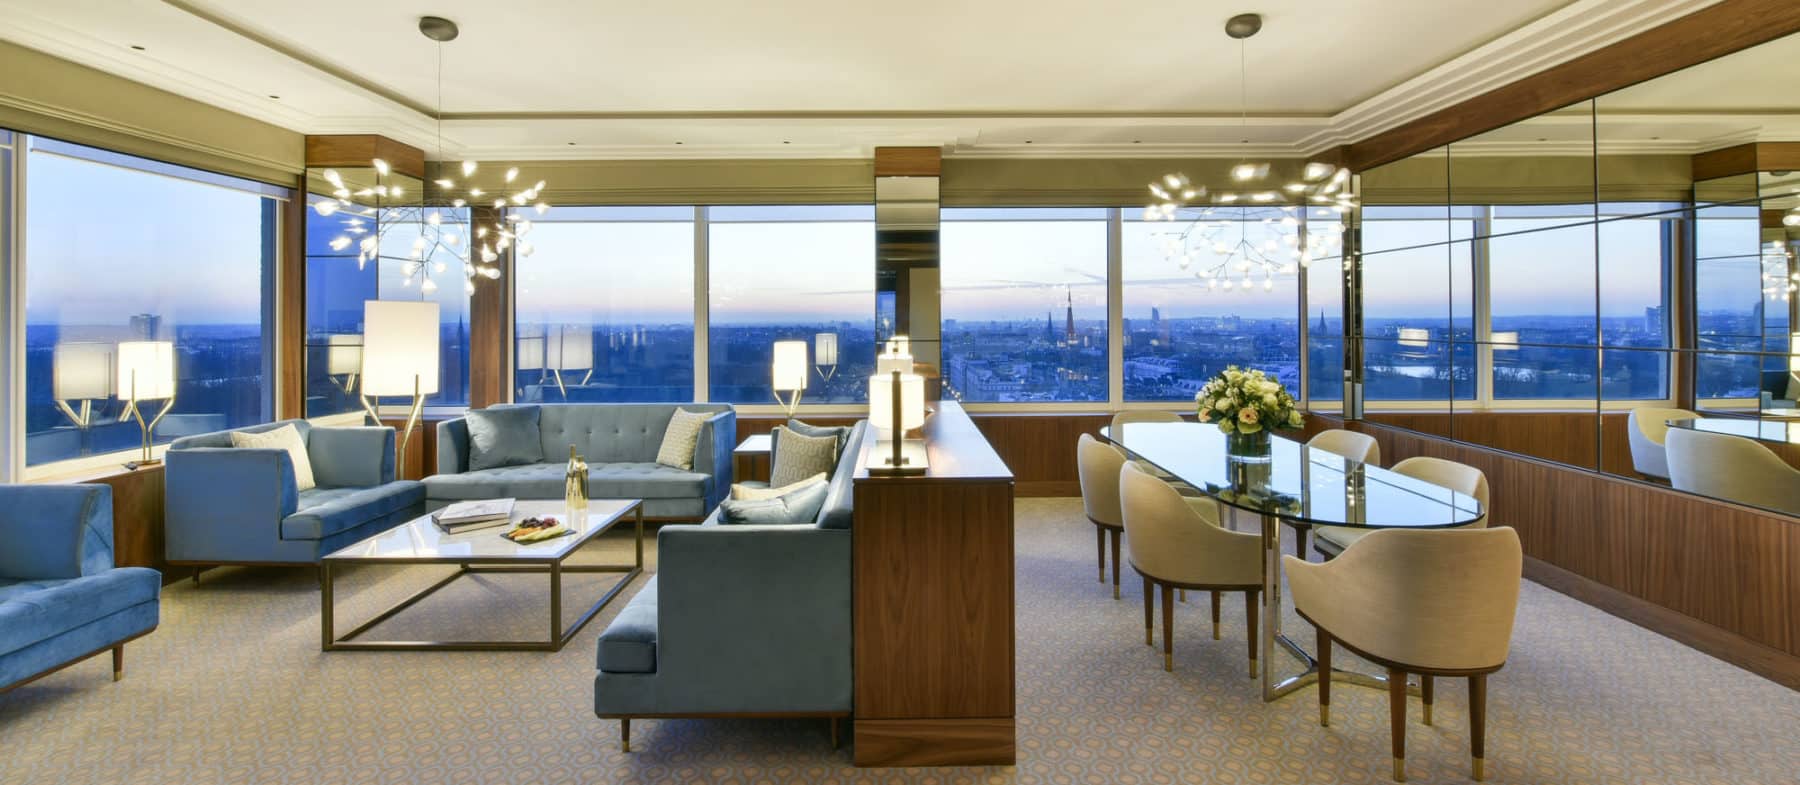 Signature Suite with views over Hyde Park and London Skyline